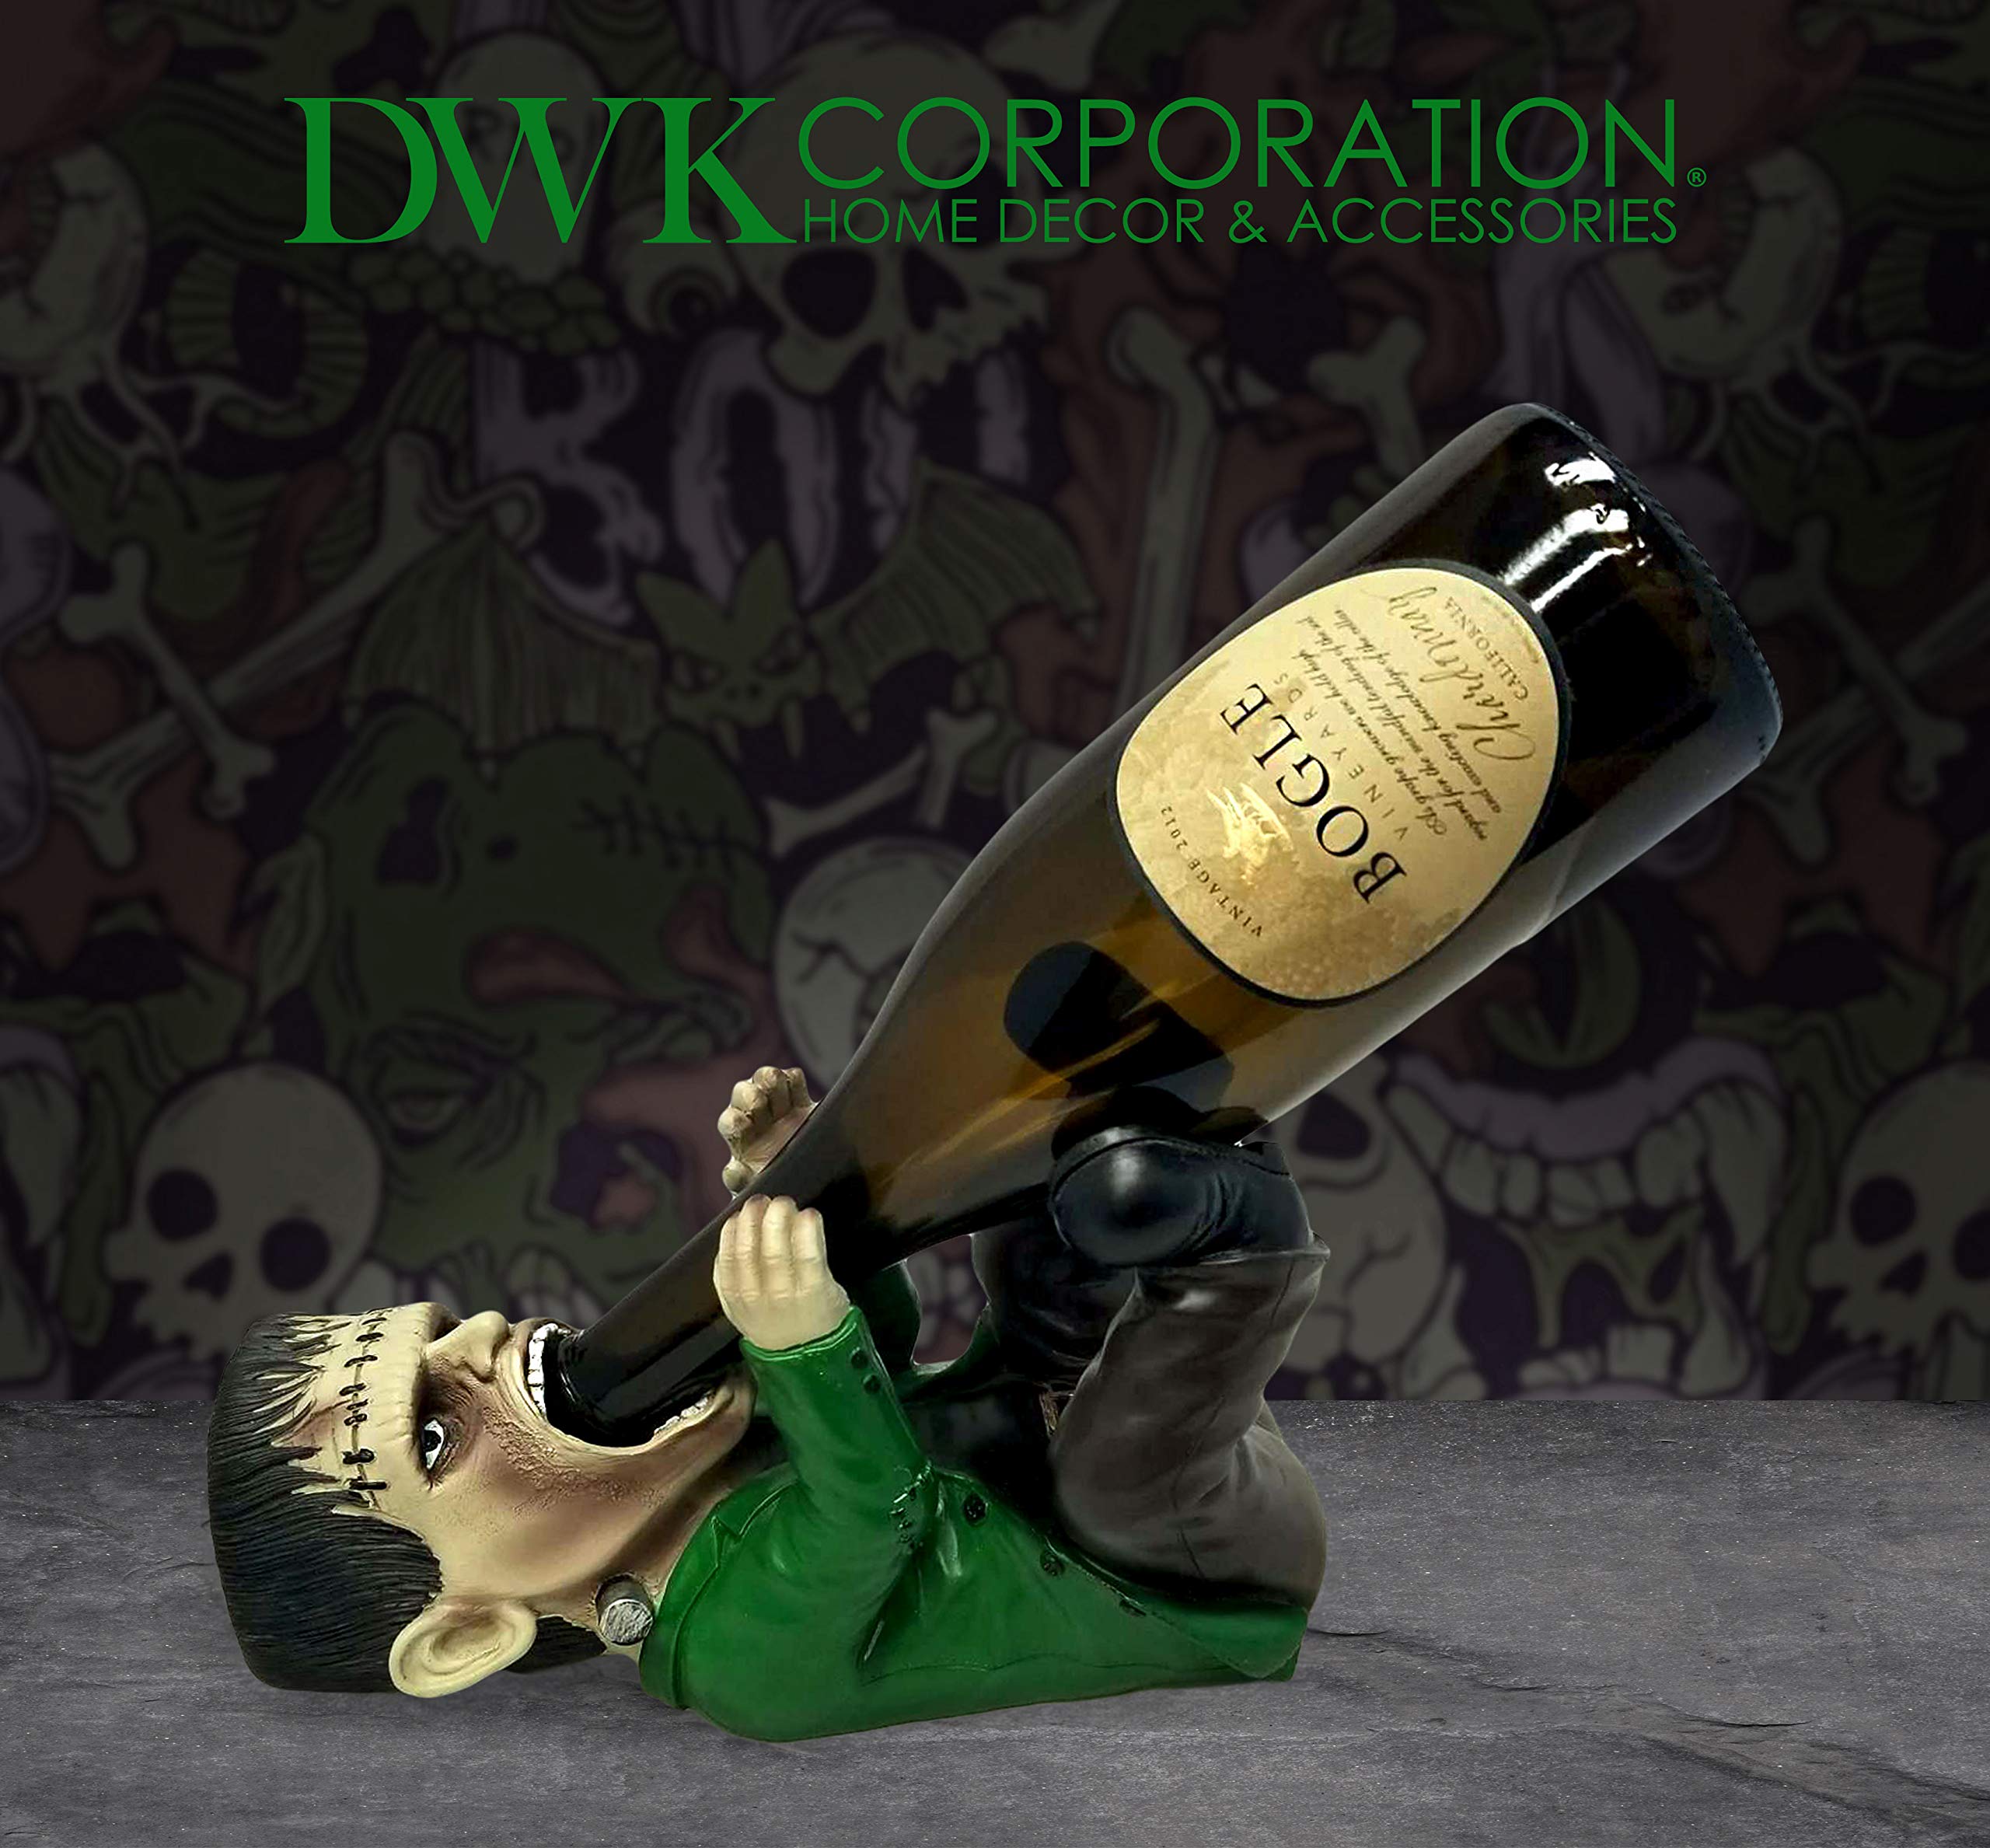 DWK Frankenstein Wine Bottle Holder | Countertop Rack Wine Holders | Horror Kitchen Wine Decorations Theme Sets | Cute Goth and Cool Mom Gifts - 10.5"